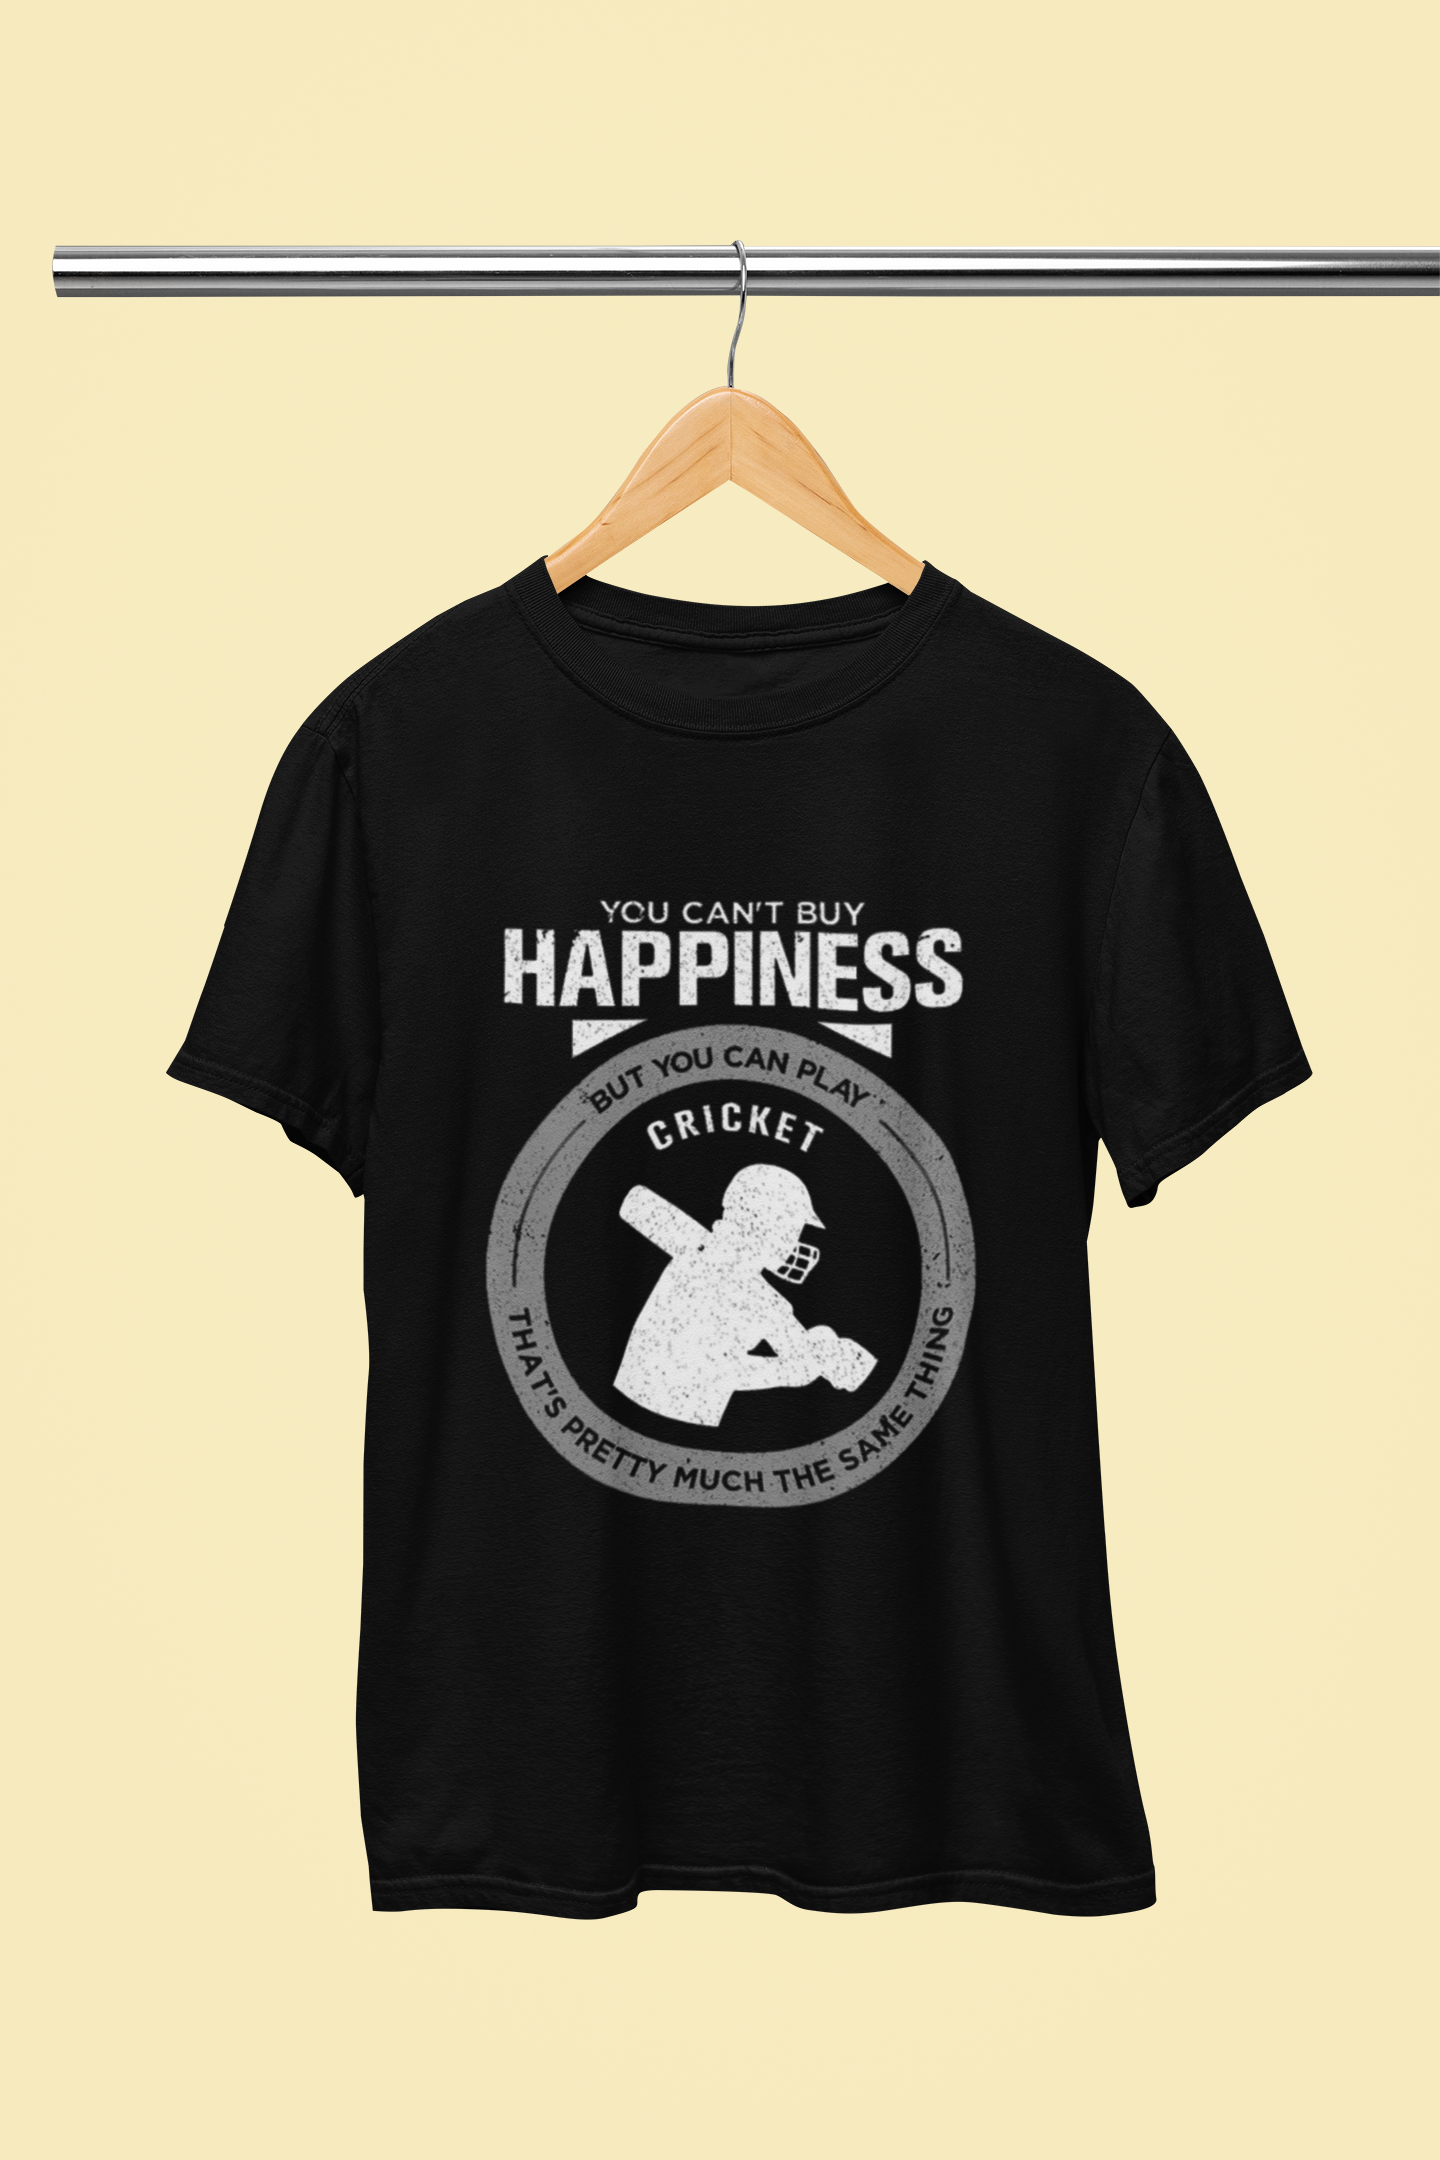 Cricket: Can't Buy Happiness, But You Can Play Cricket T-Shirt